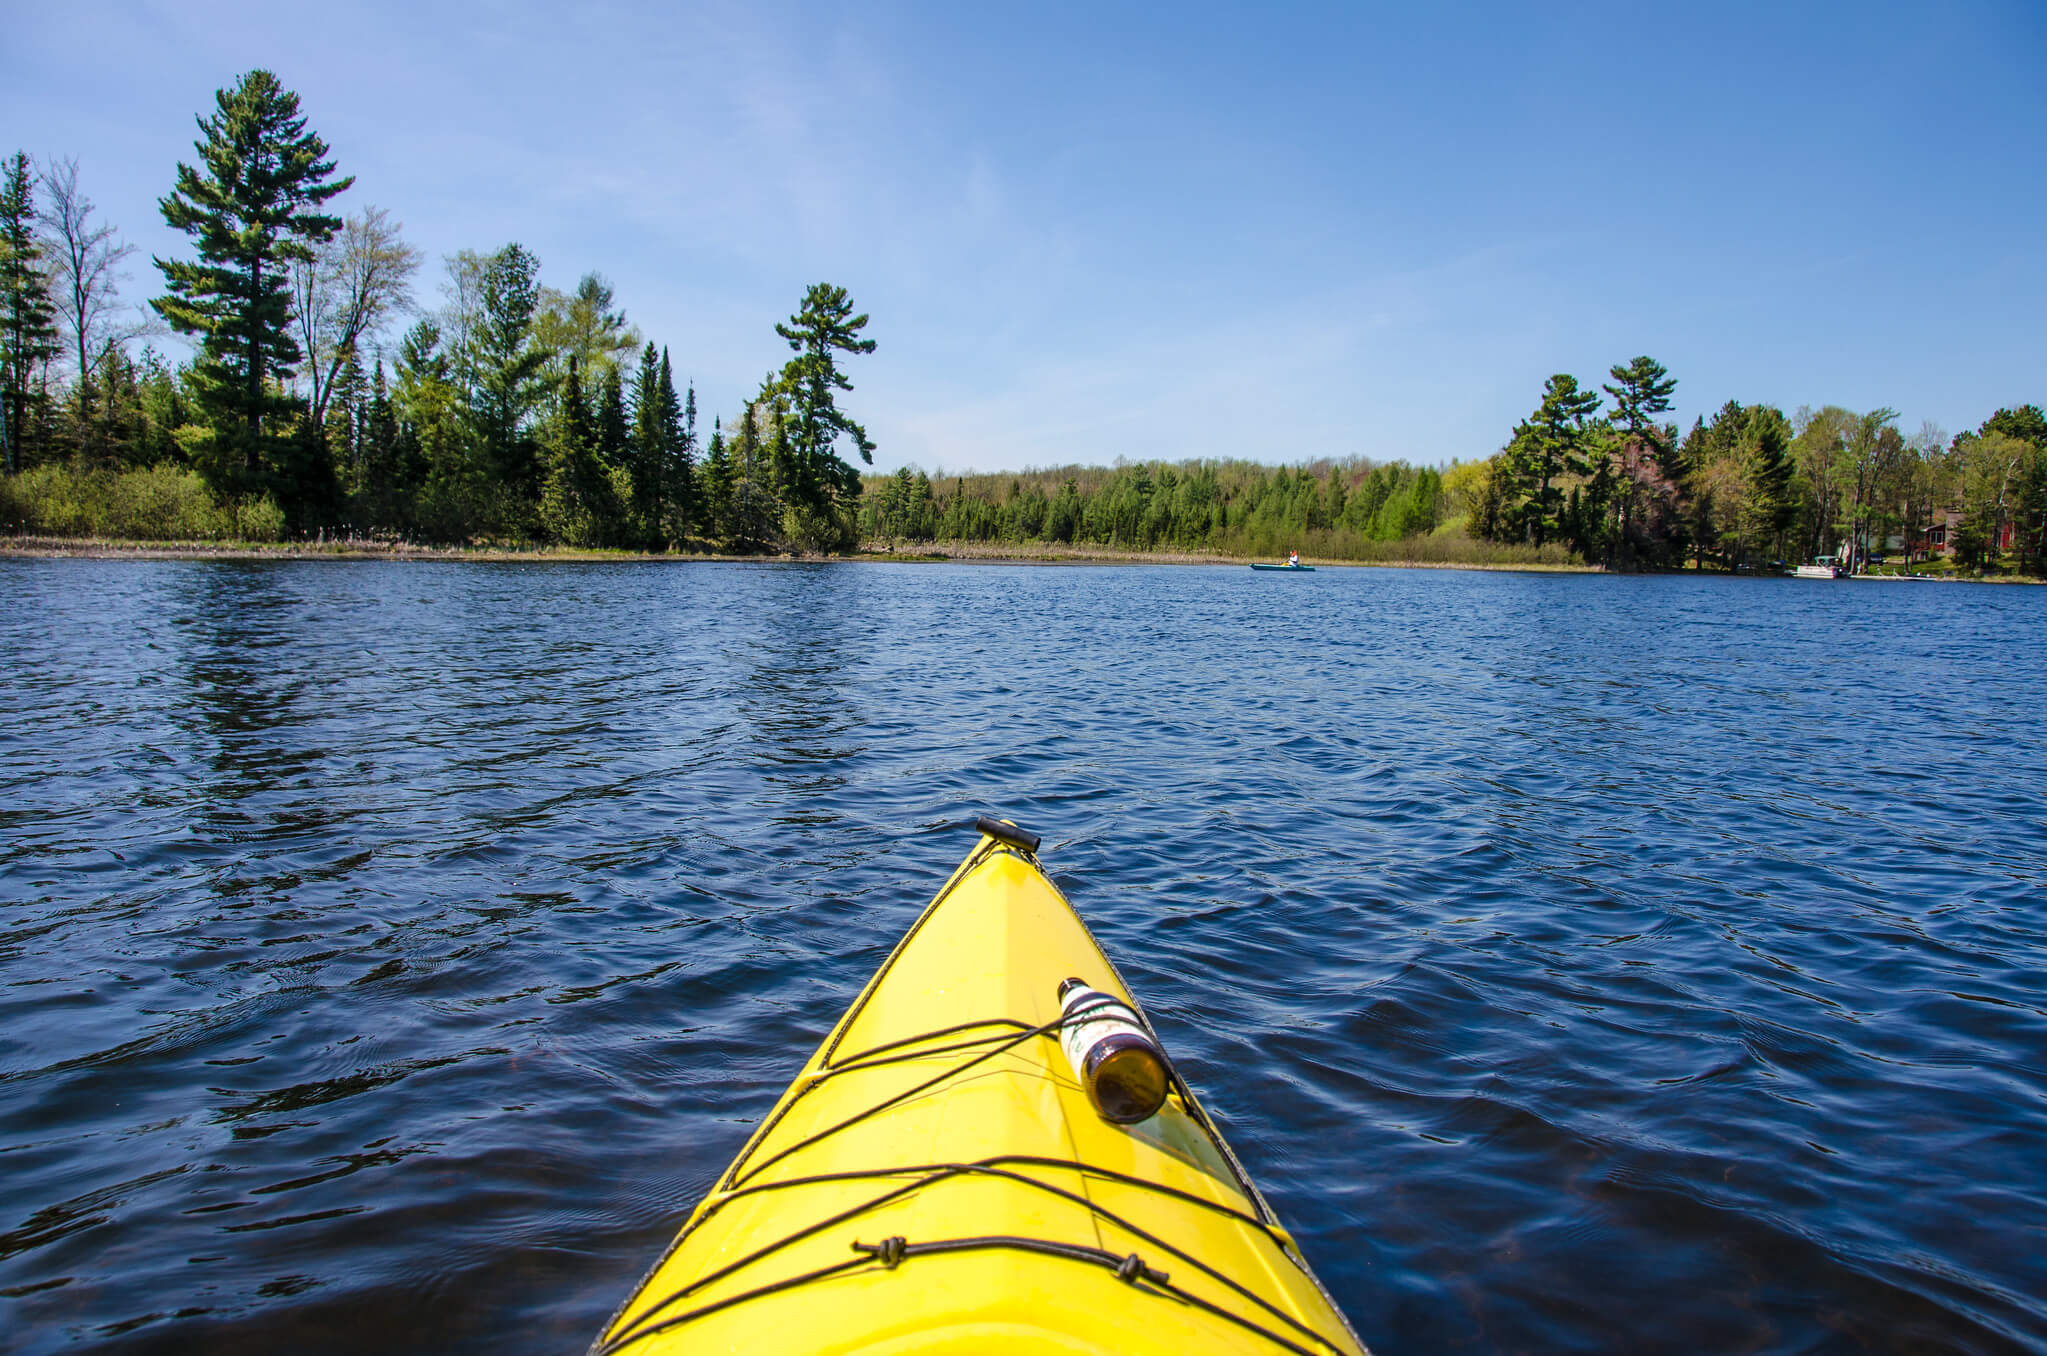 The yellow front tip of a kayak looking out over a deep blue Wisconsin lake with trees on the shoreline.